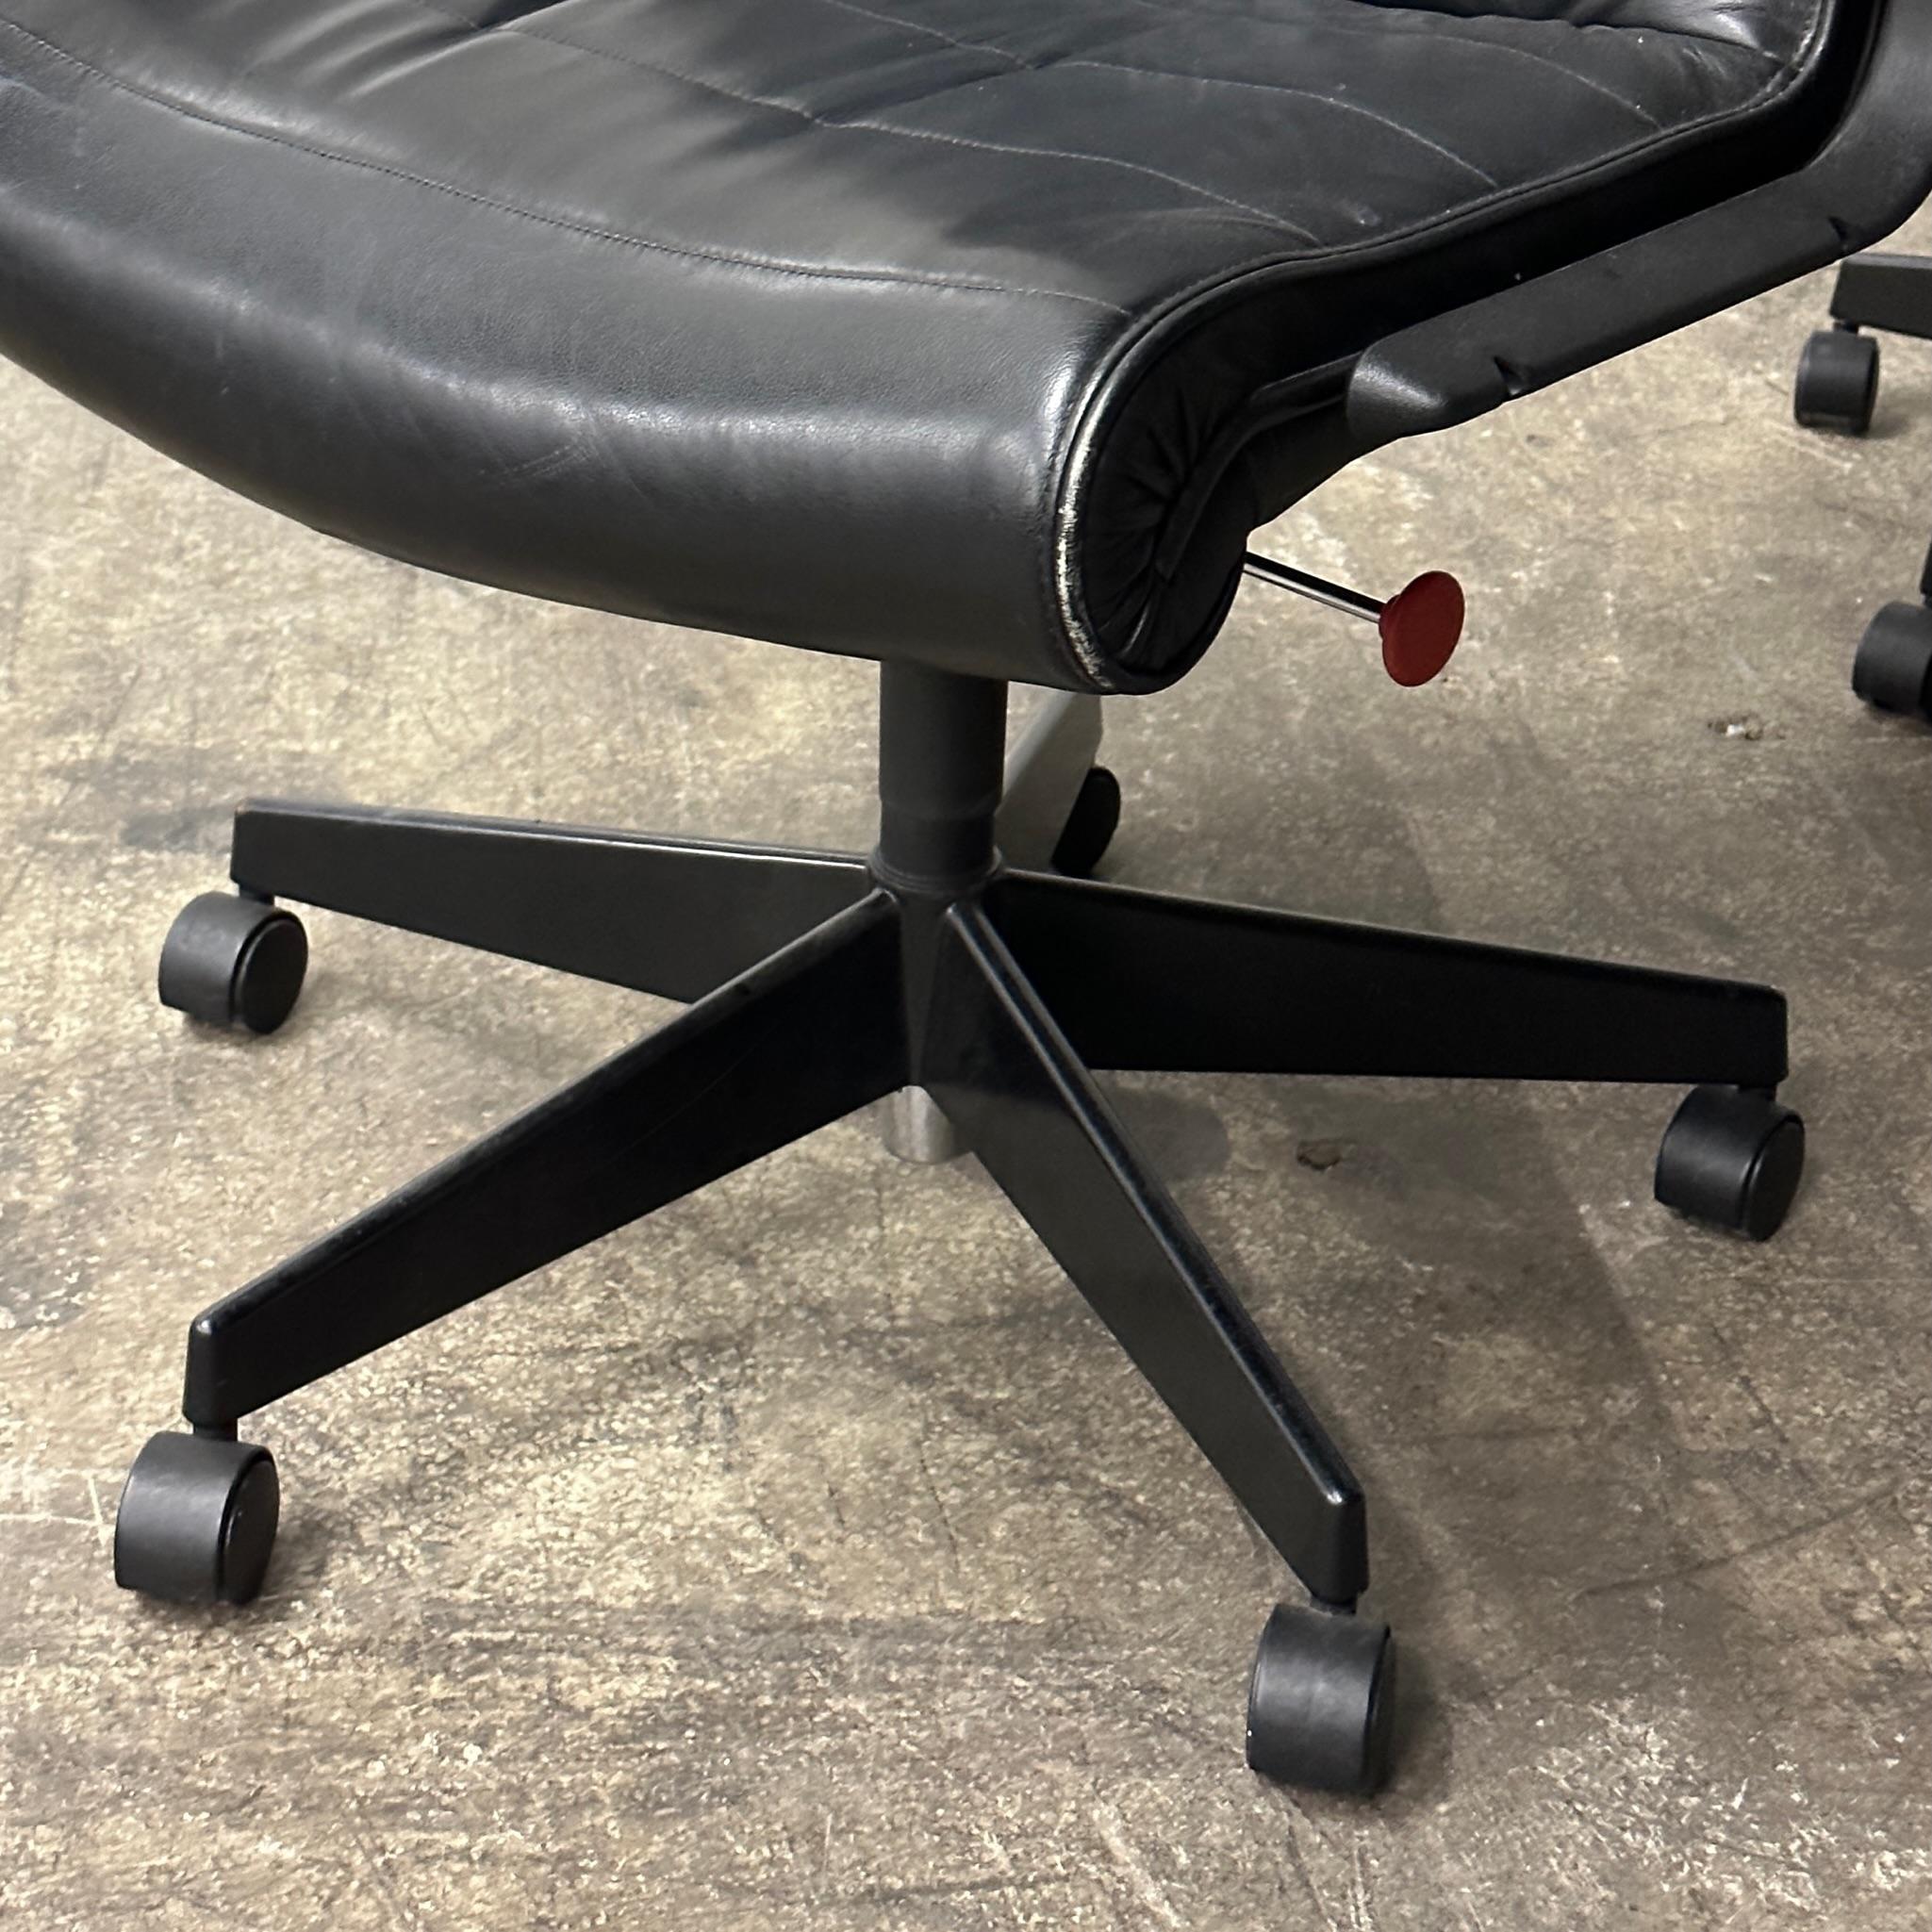  Height adjustable, tilt adjustable, and lumbar adjustable. Swivels.

Price is for the set. Contact us if you'd like to purchase a single item.